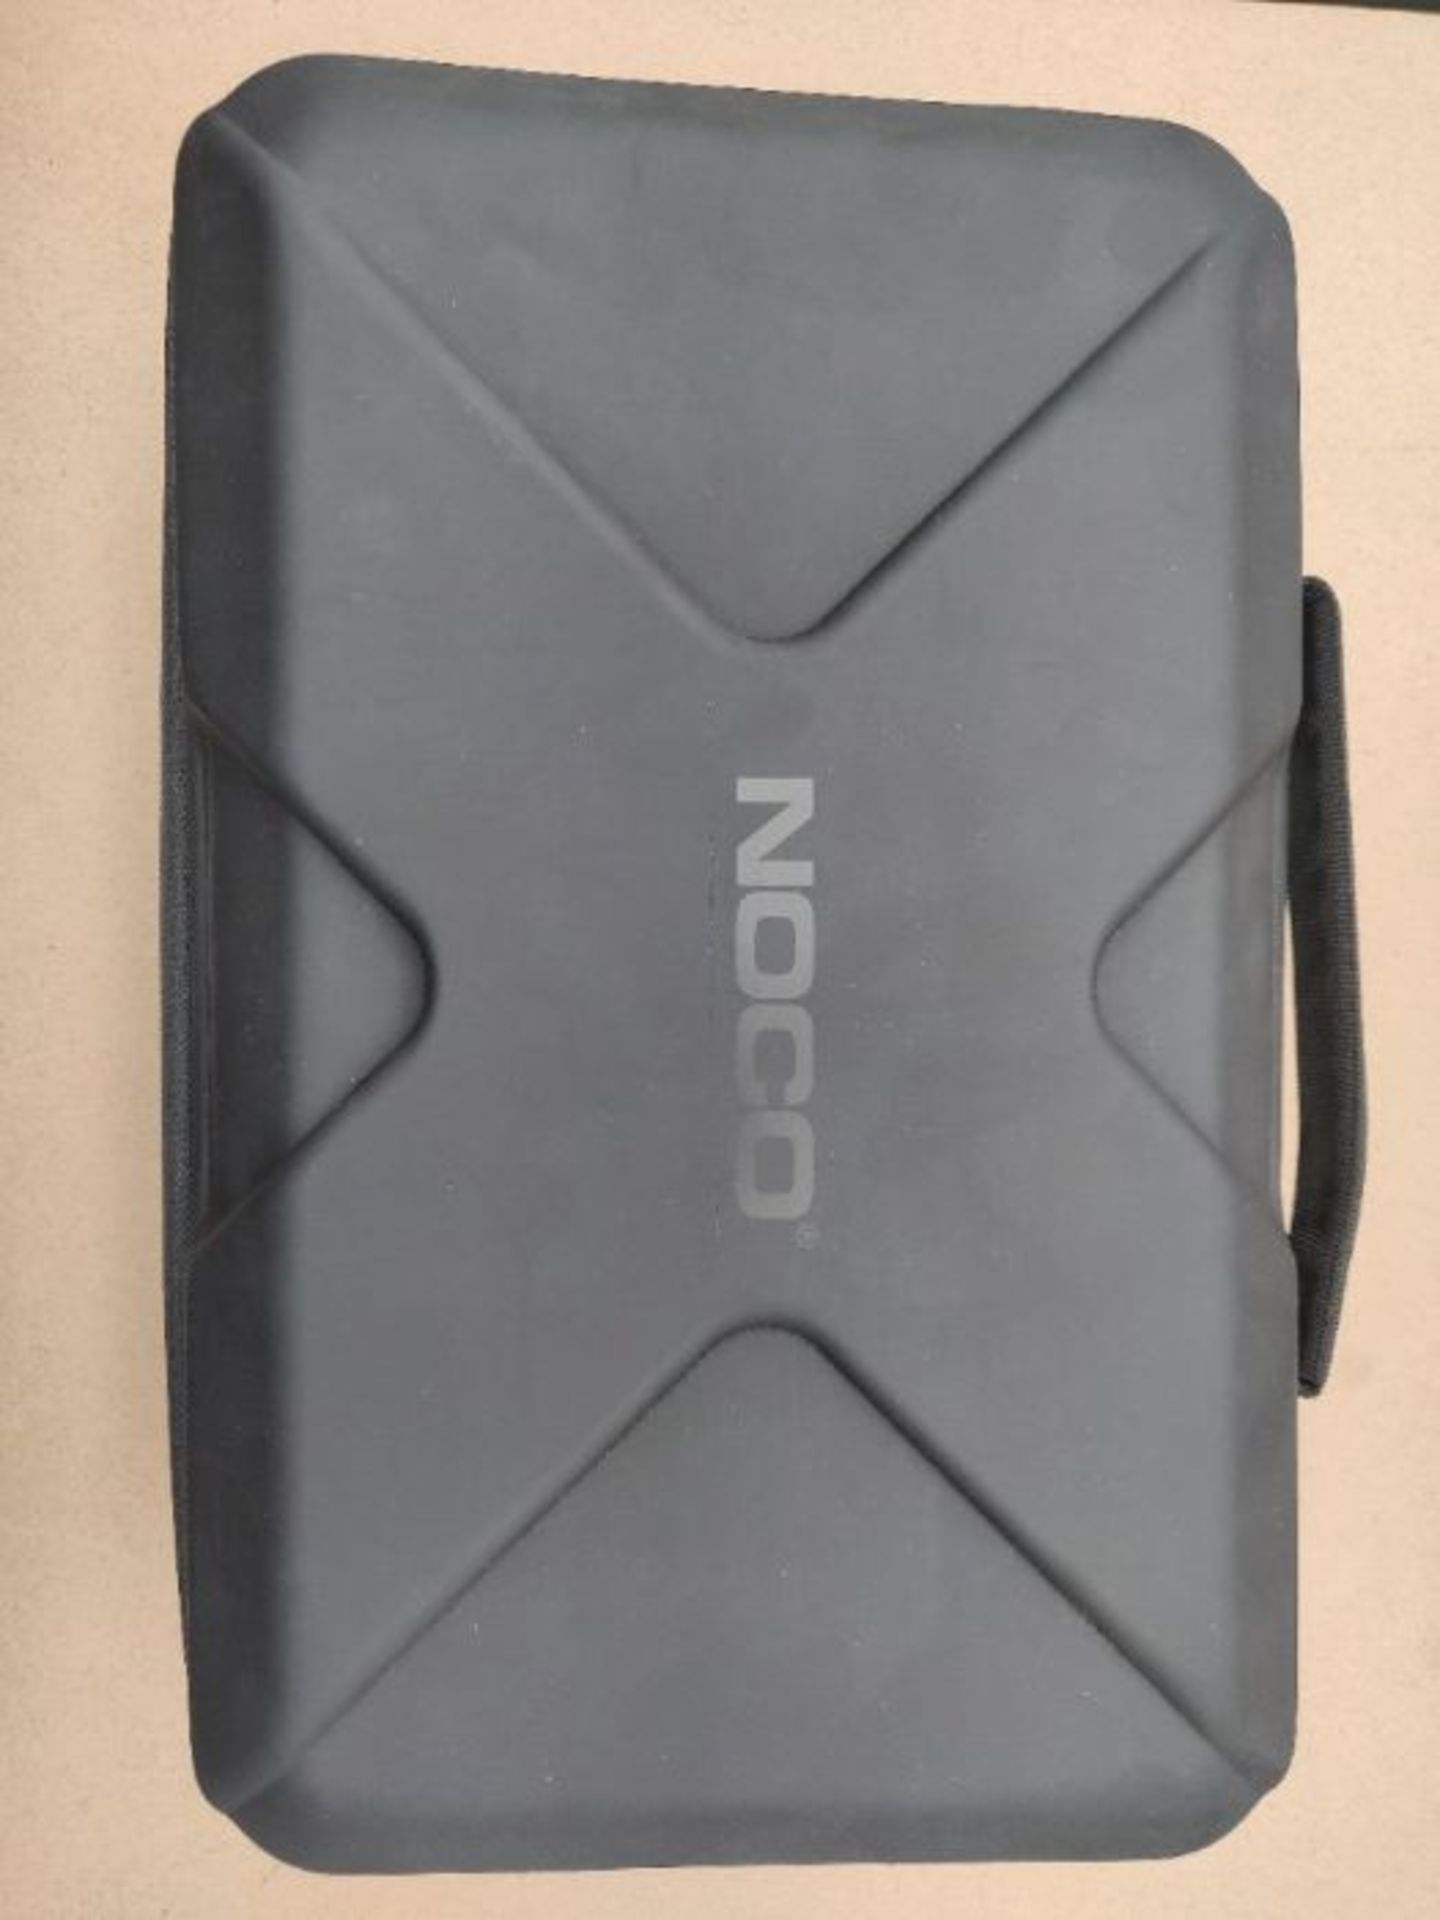 NOCO GBC015 Boost Pro EVA Protection Case For GB150 NOCO Boost UltraSafe Lithium Jump - Image 2 of 2